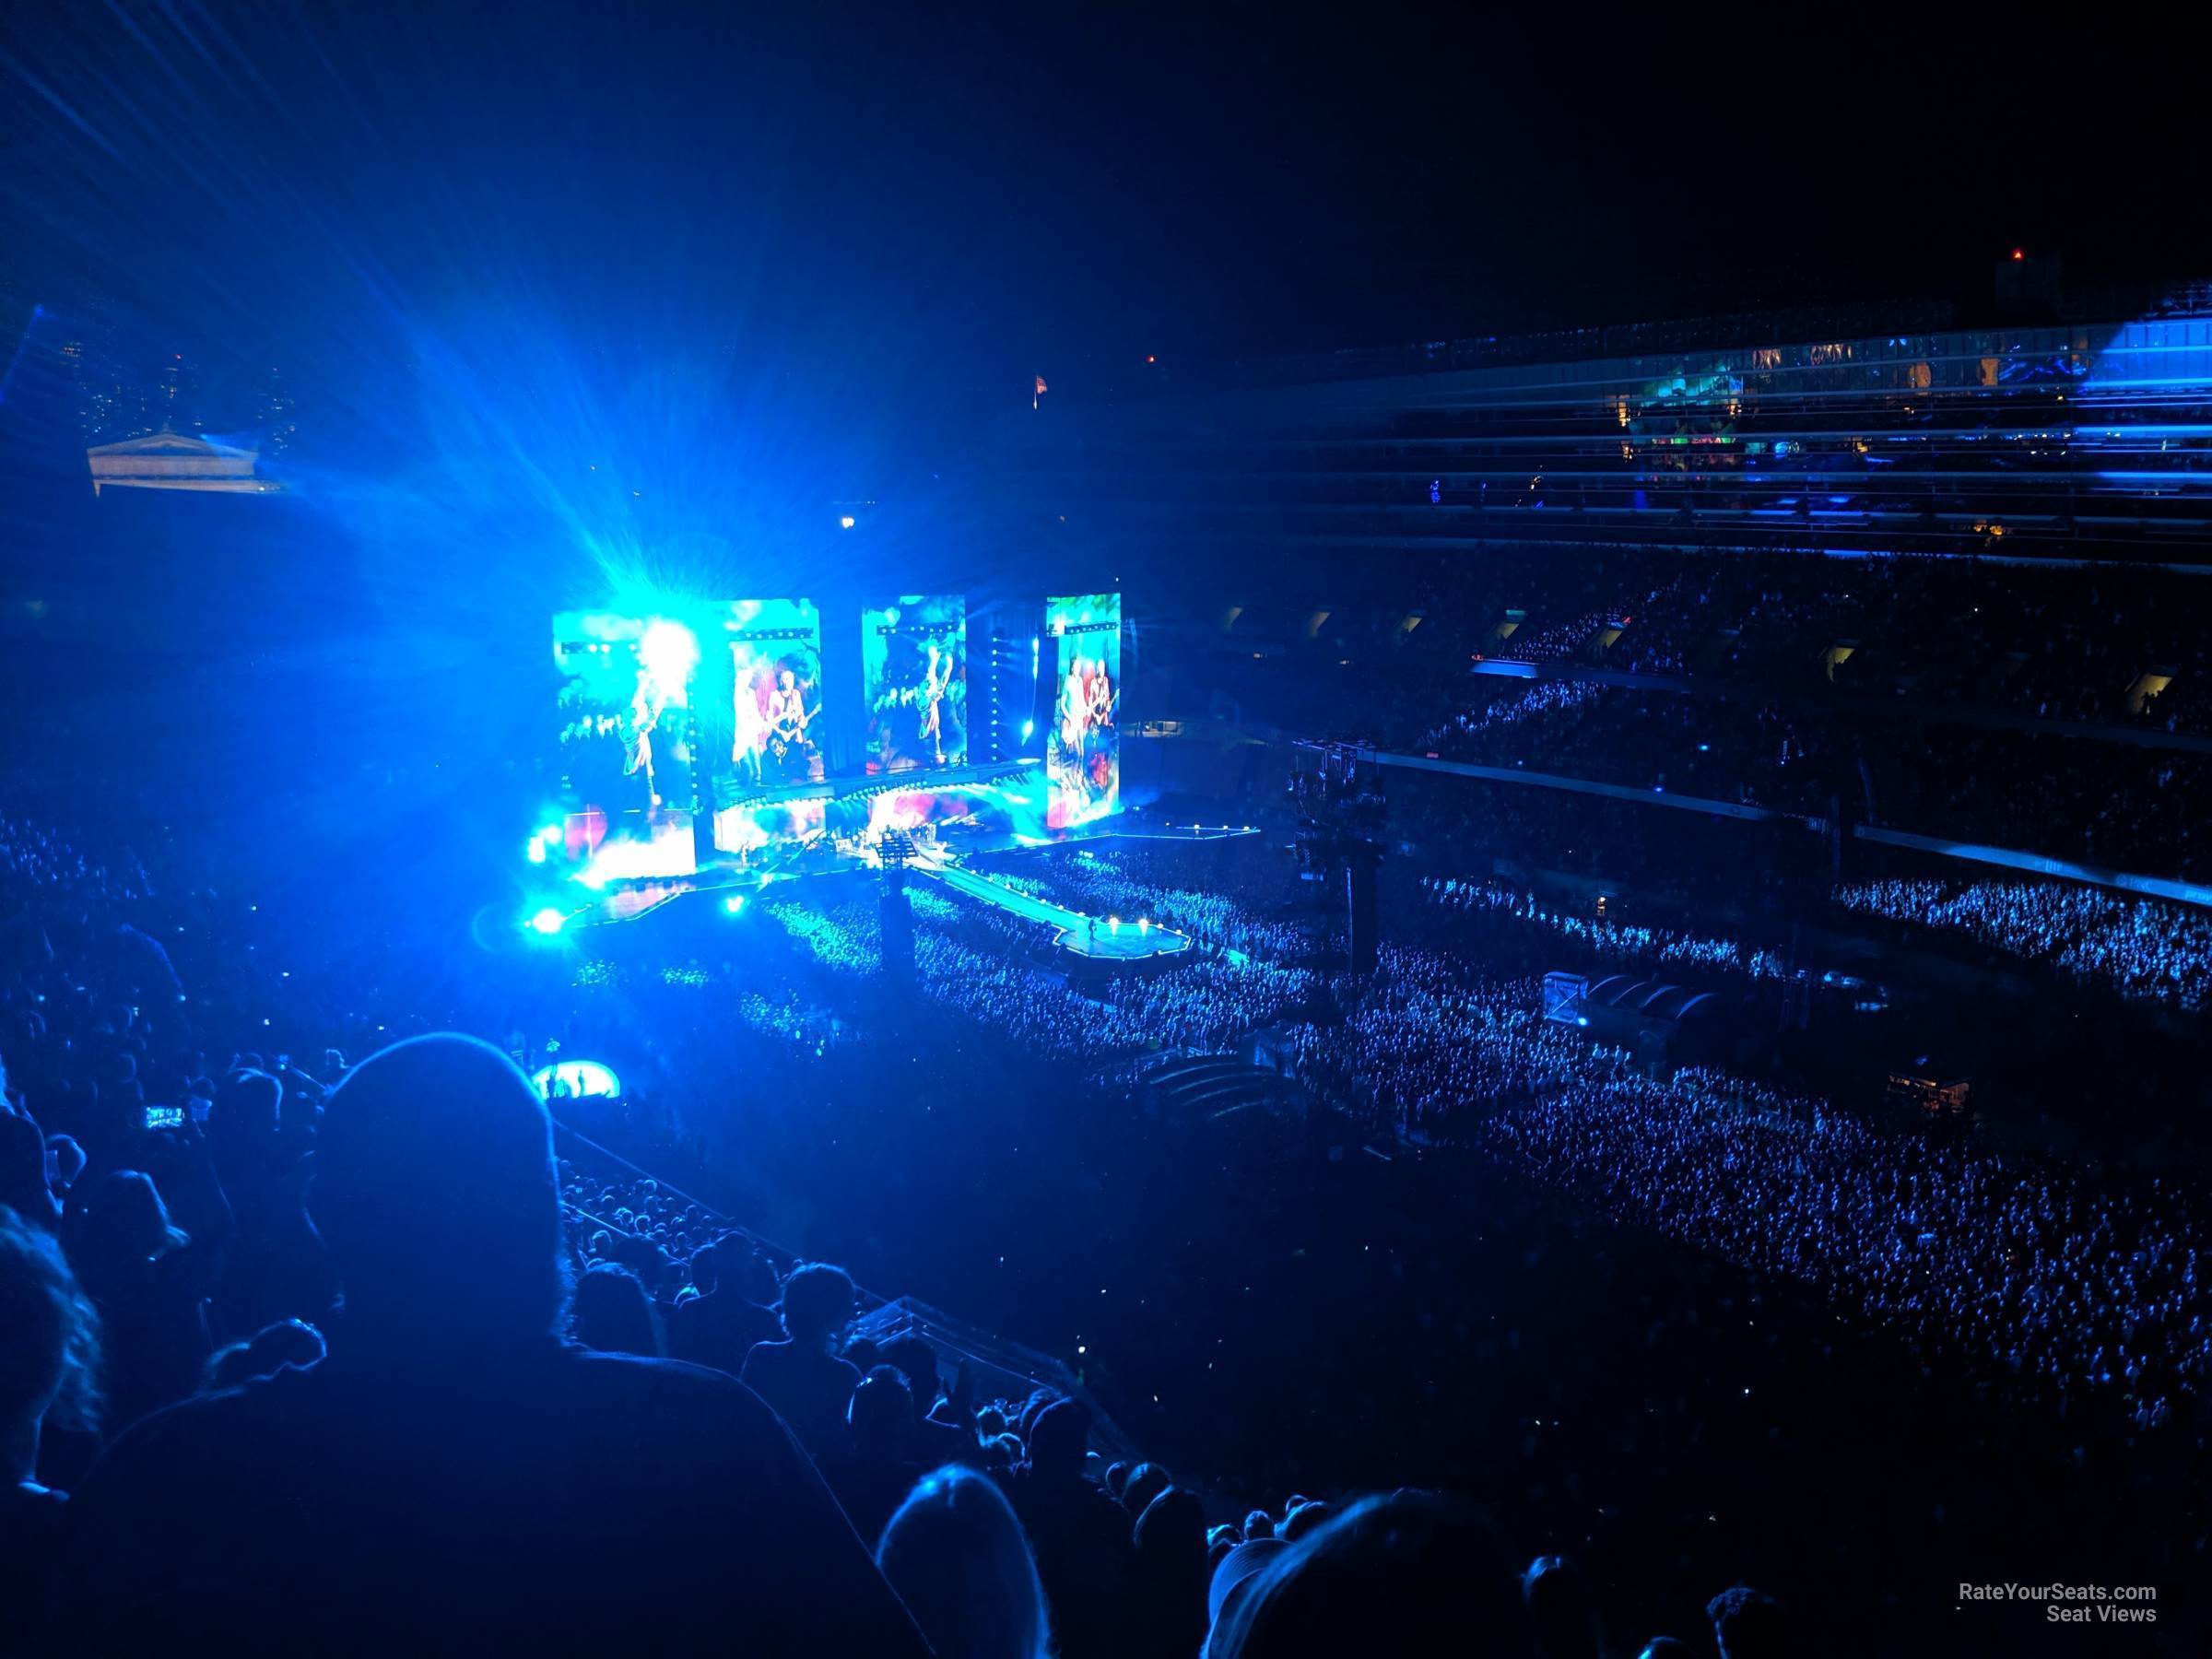 section 430, row 16 seat view  for concert - soldier field